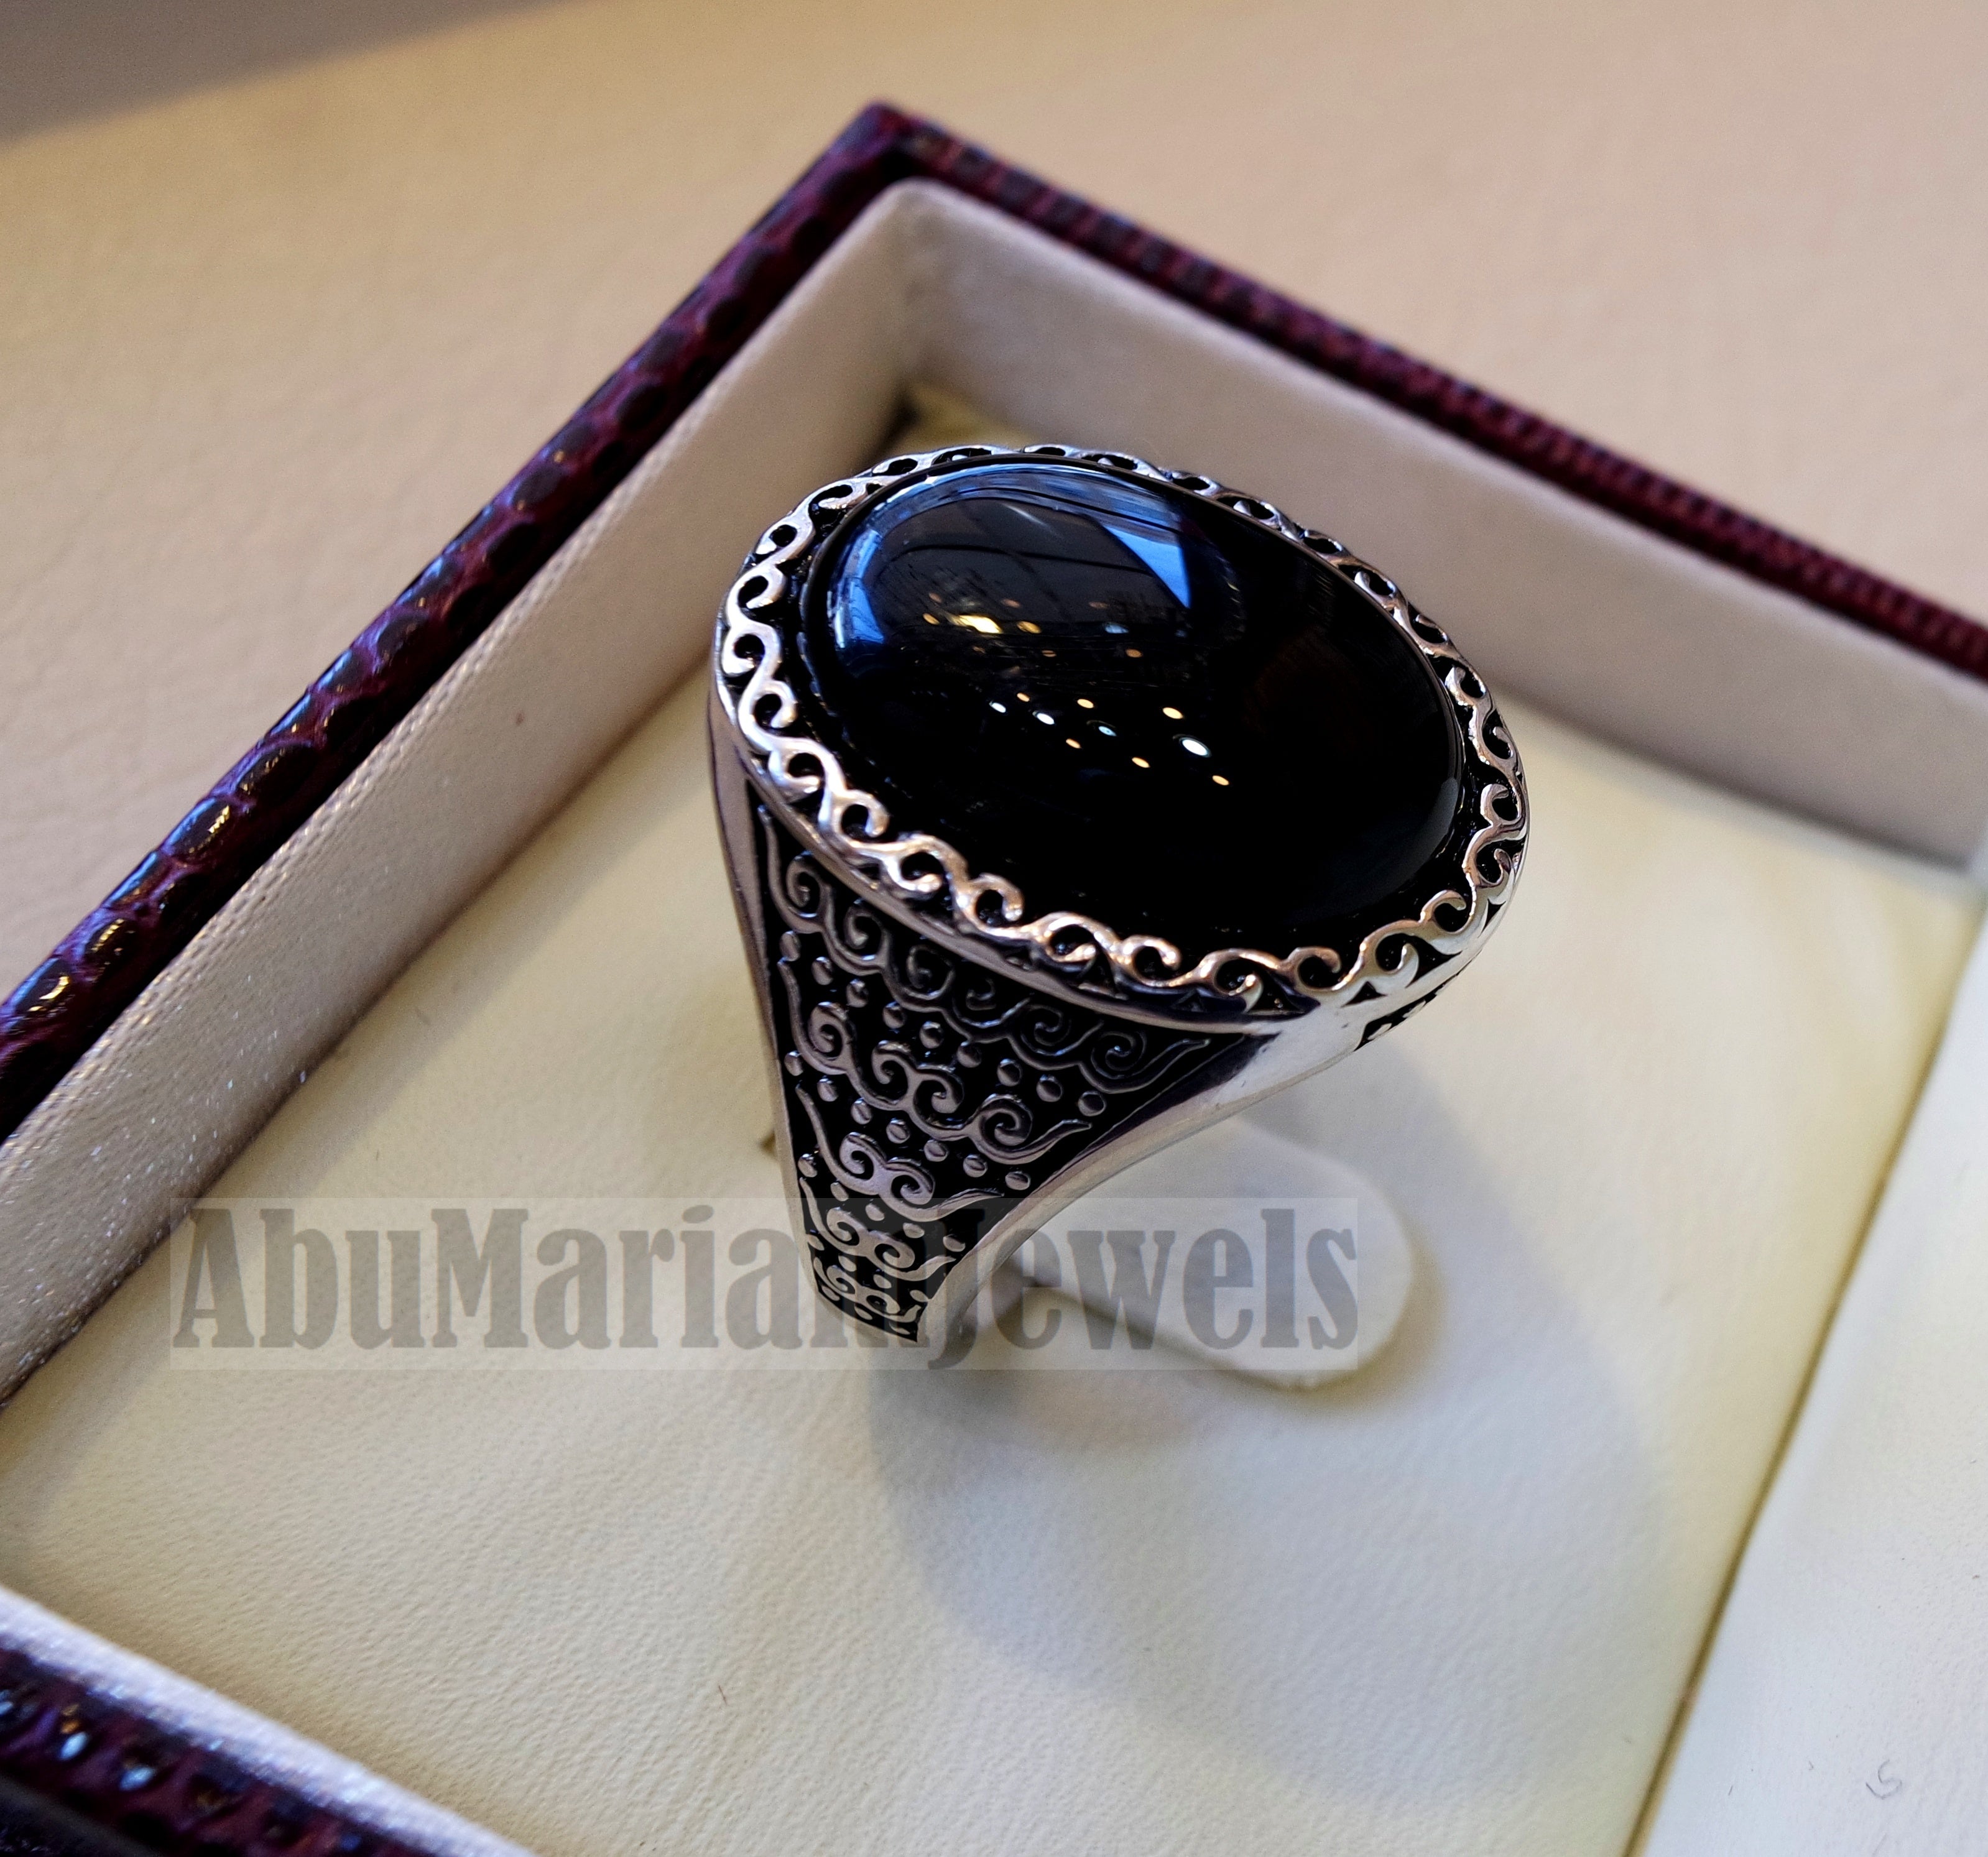 man ring aqeeq natural agate onyx oval stone black big gem sterling silver antique ottoman turkey style fast shipping all sizes men gift